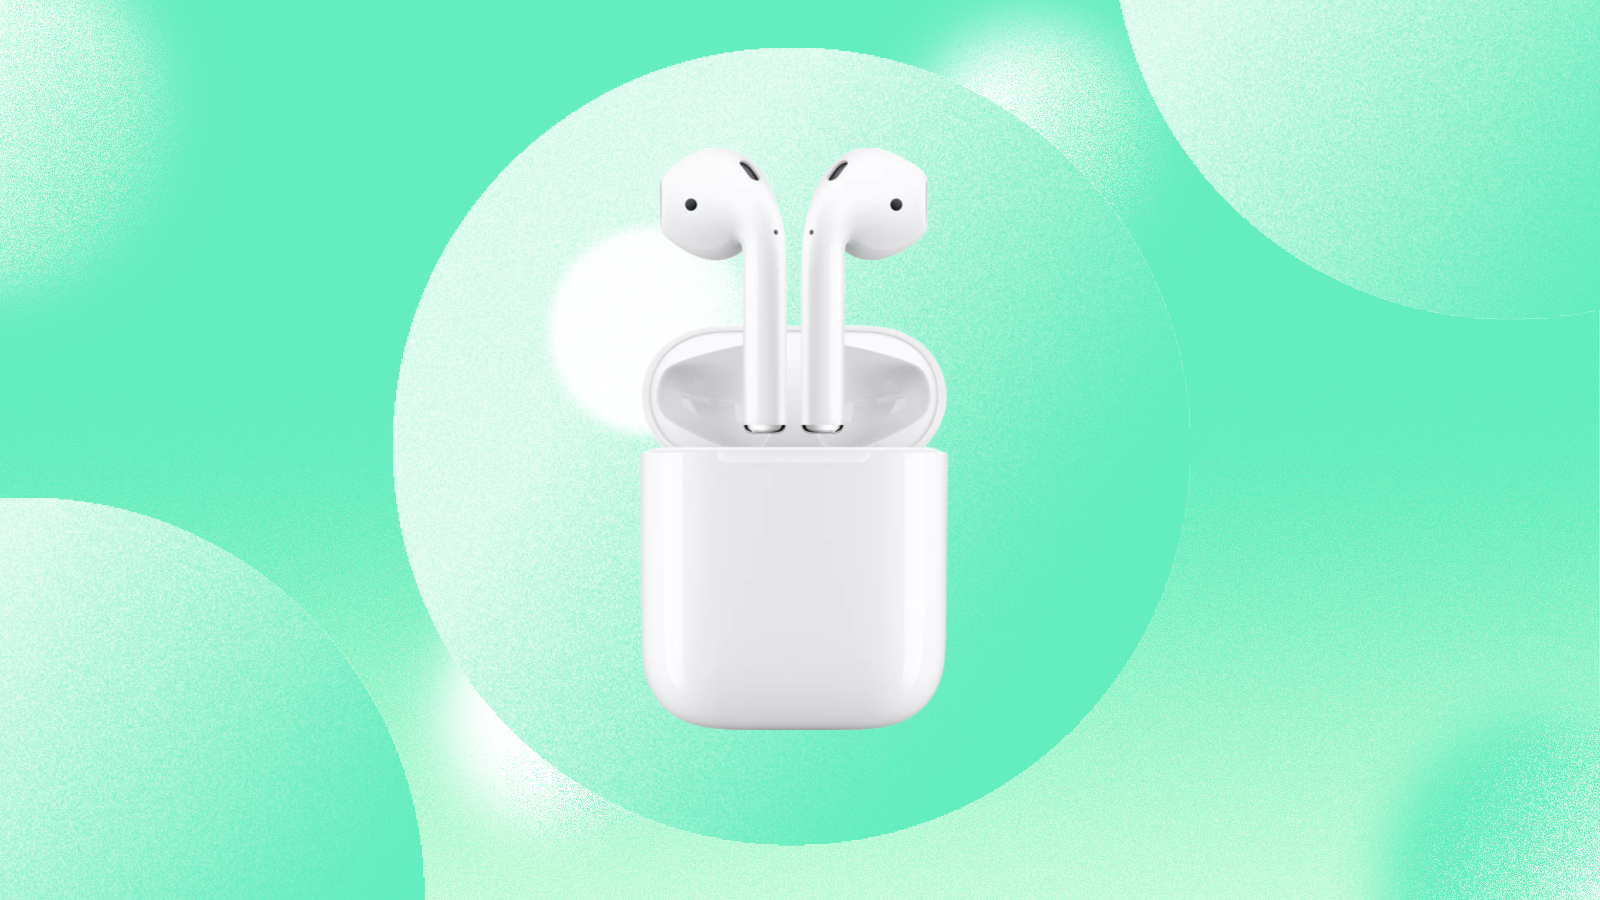 Best AirPods Deals: Save Up to $45 on Beats, AirPods 2 and